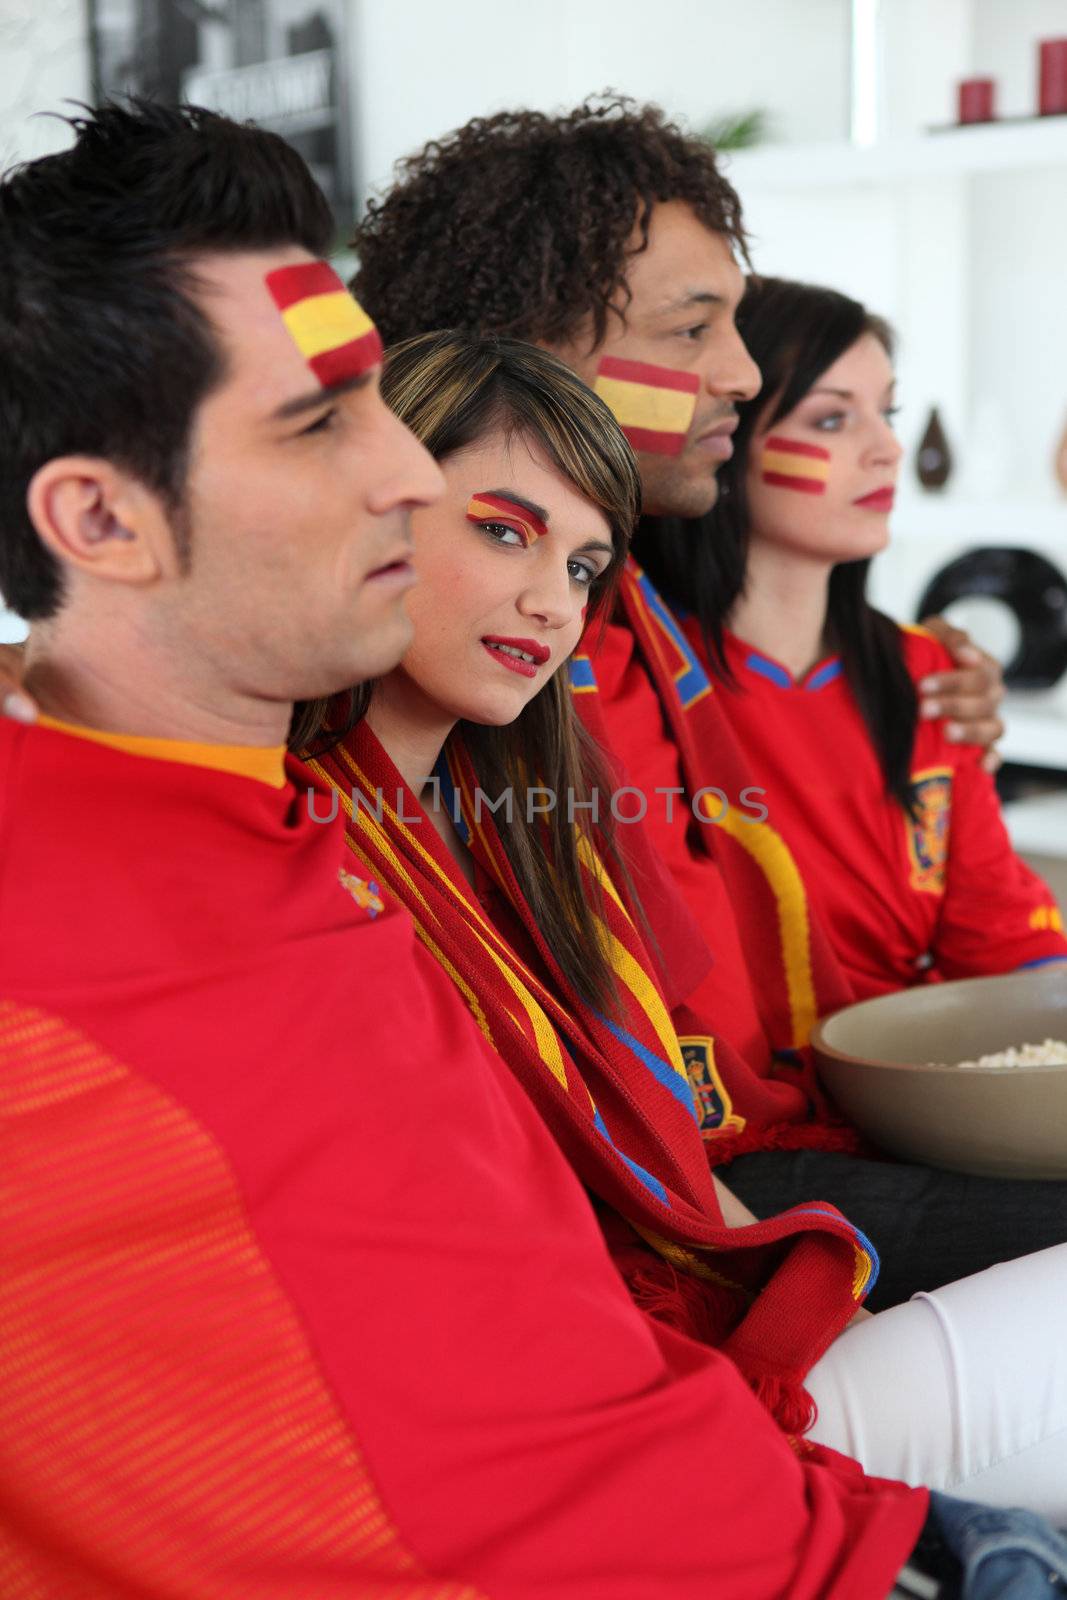 portrait of Spanish supporters watching soccer match on telly by phovoir